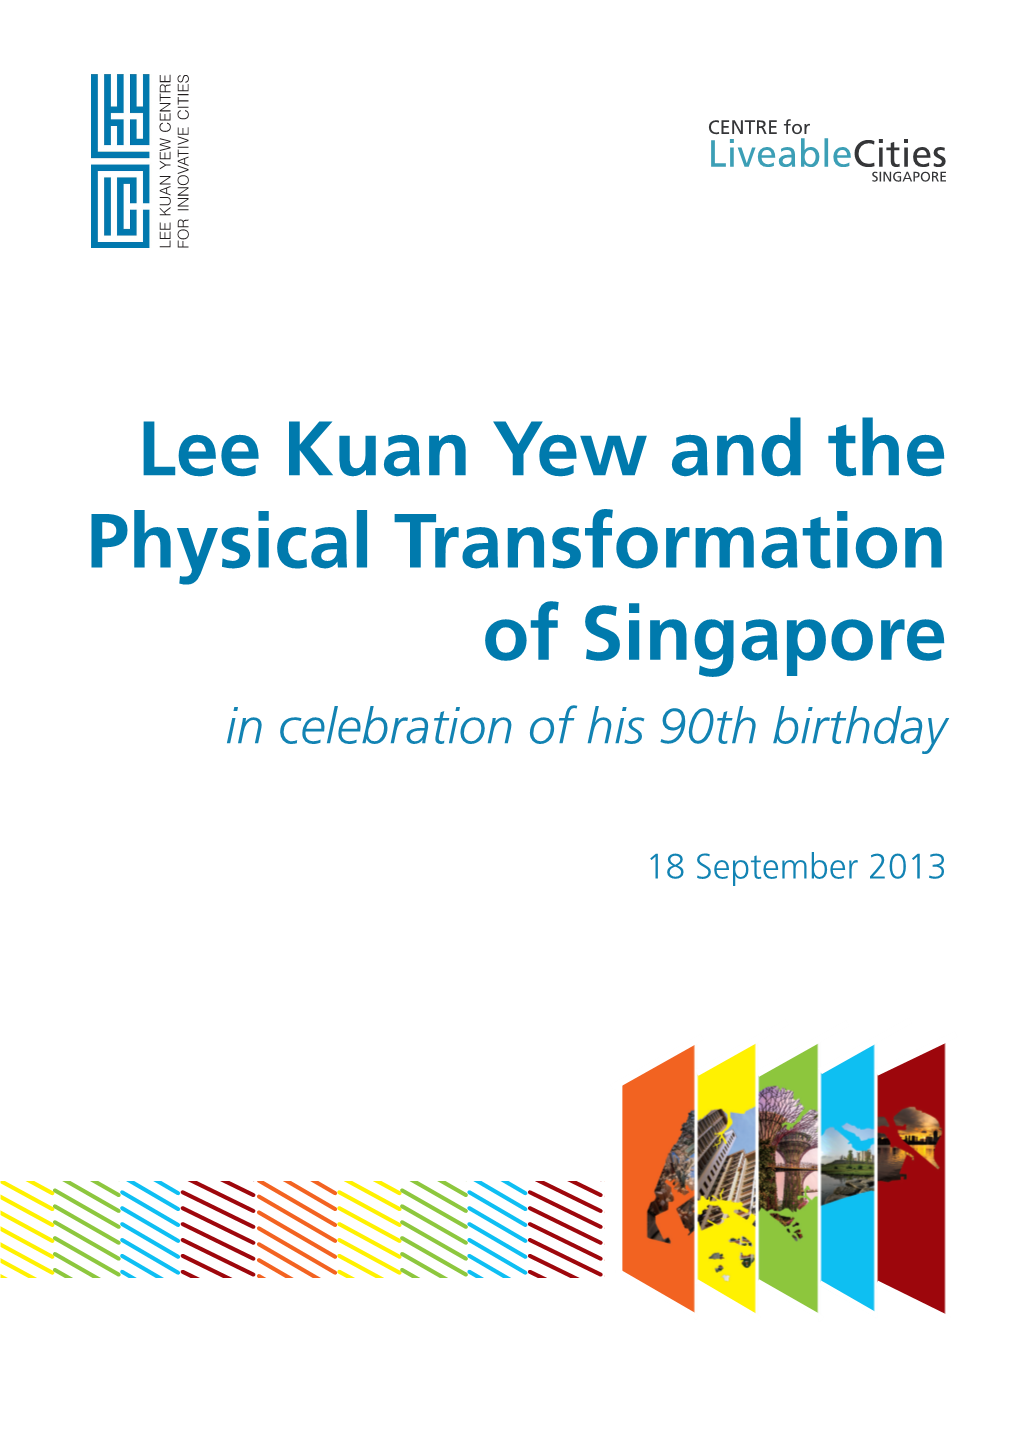 Lee Kuan Yew and the Physical Transformation of Singapore in Celebration of His 90Th Birthday